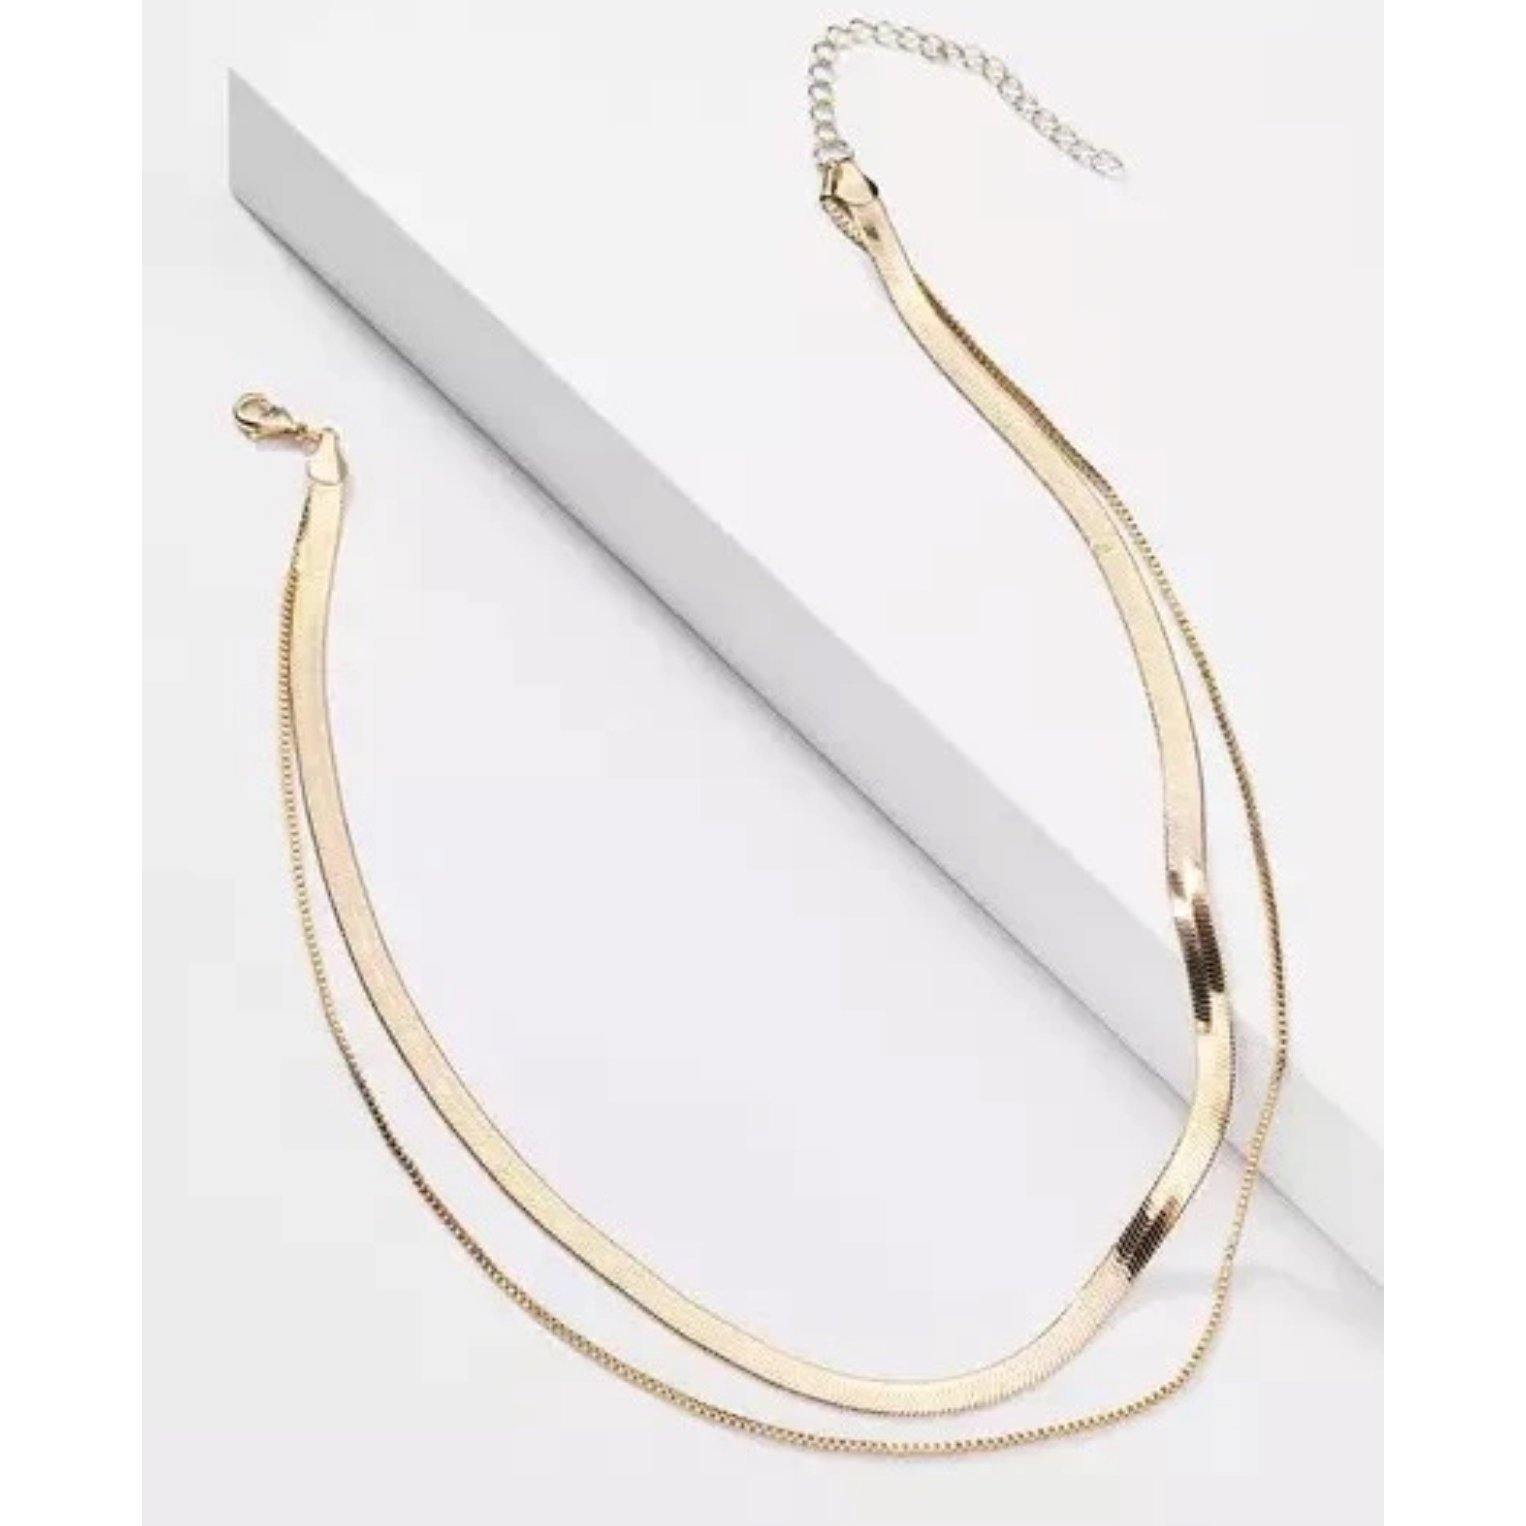 Heba Necklace - Fashion Girl Online Store